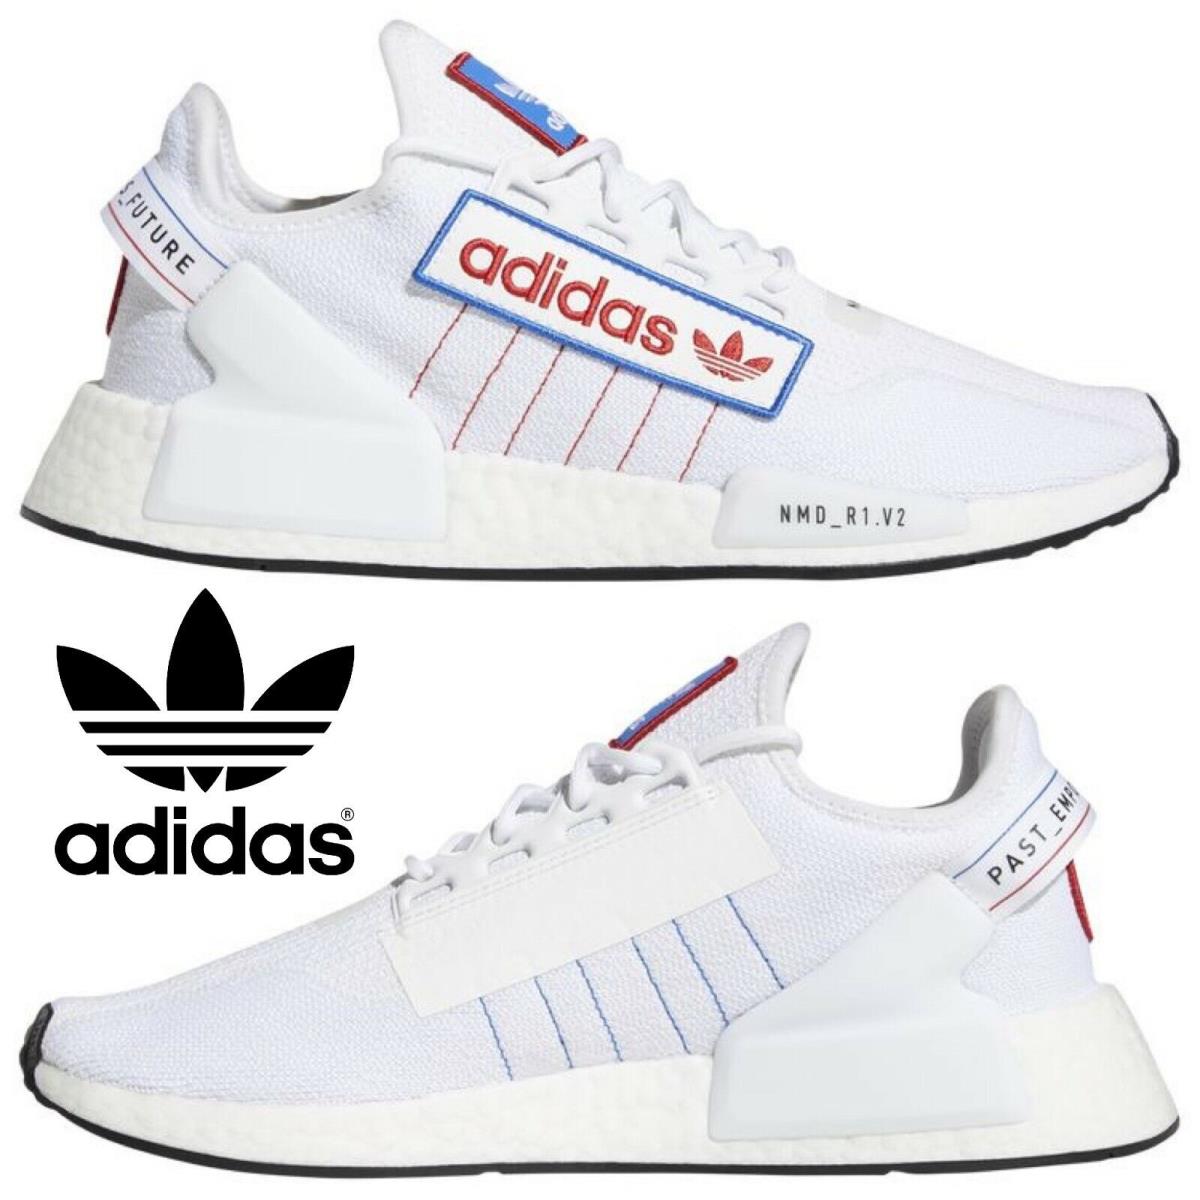 Adidas Originals Nmd R1 V2 Men`s Sneakers Running Shoes Gym Casual Sport White - White , White/Black Manufacturer